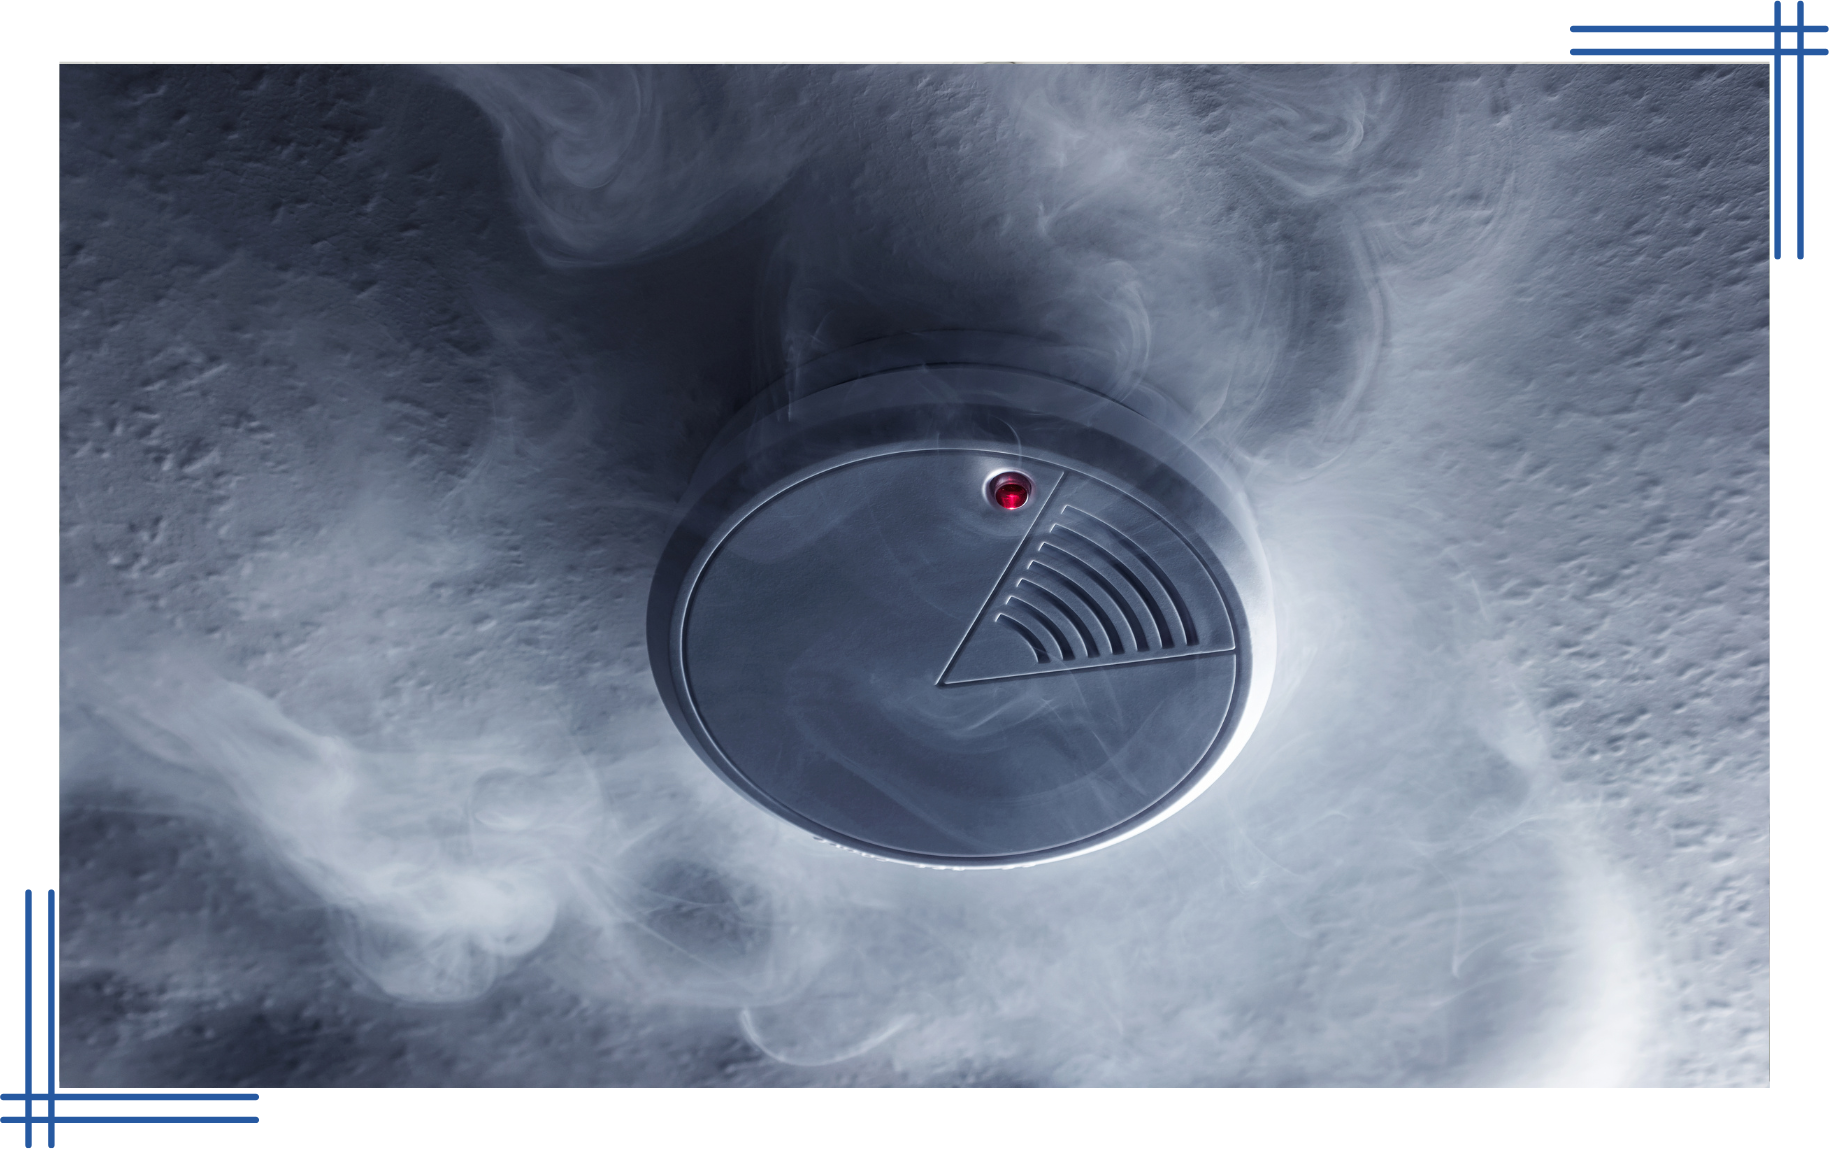 A smoke detector with smoke coming out of it